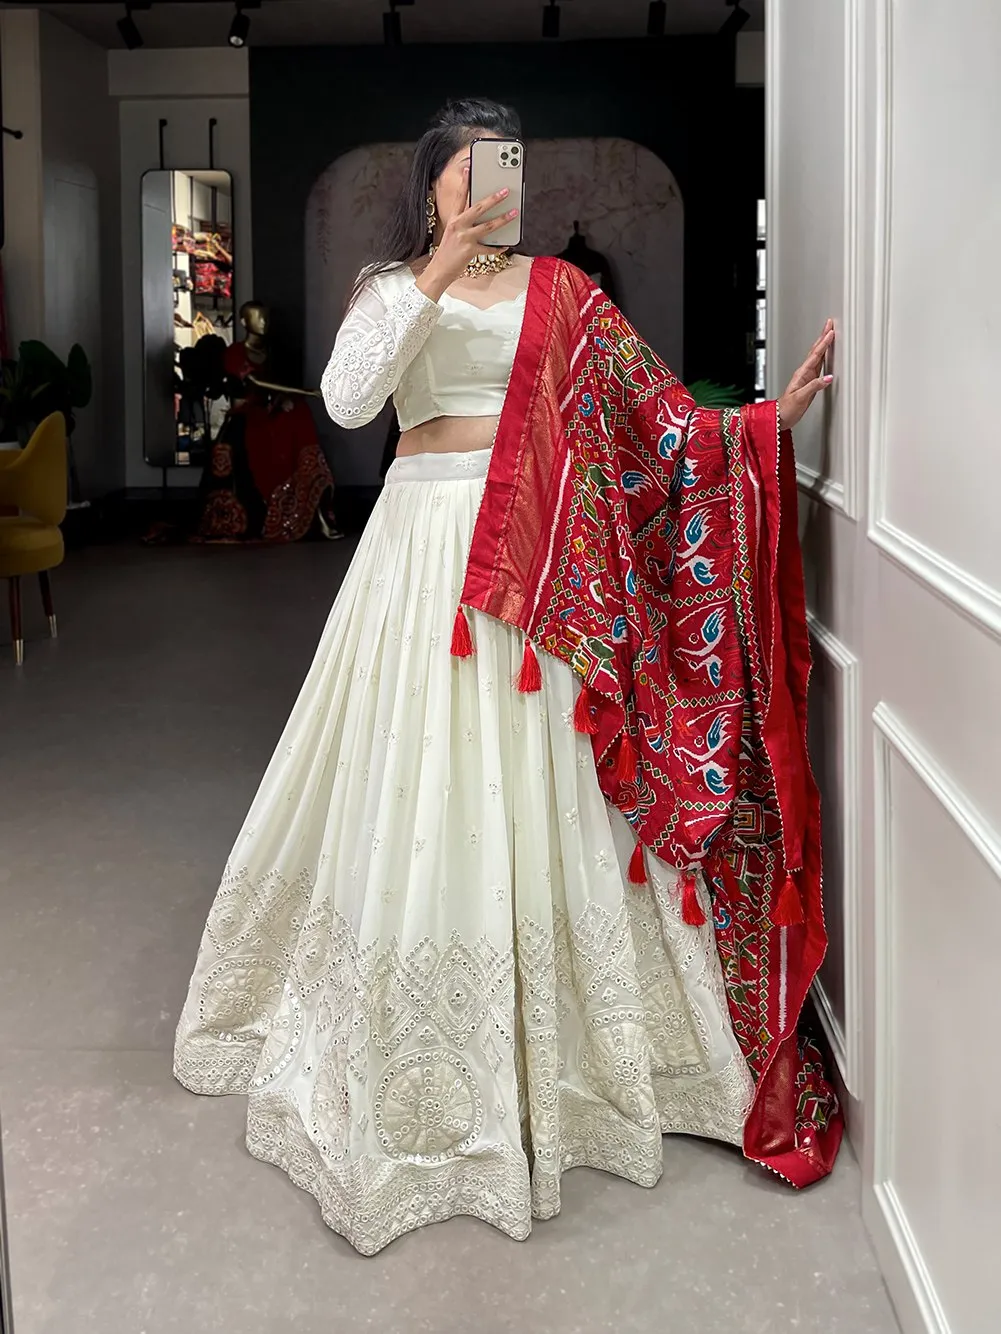 Buy Yug Fashion Women's Wedding Special Semi Stiched Red White Silk Lehenga  Choli With Duptta & Blouse. (Free Size) at Amazon.in